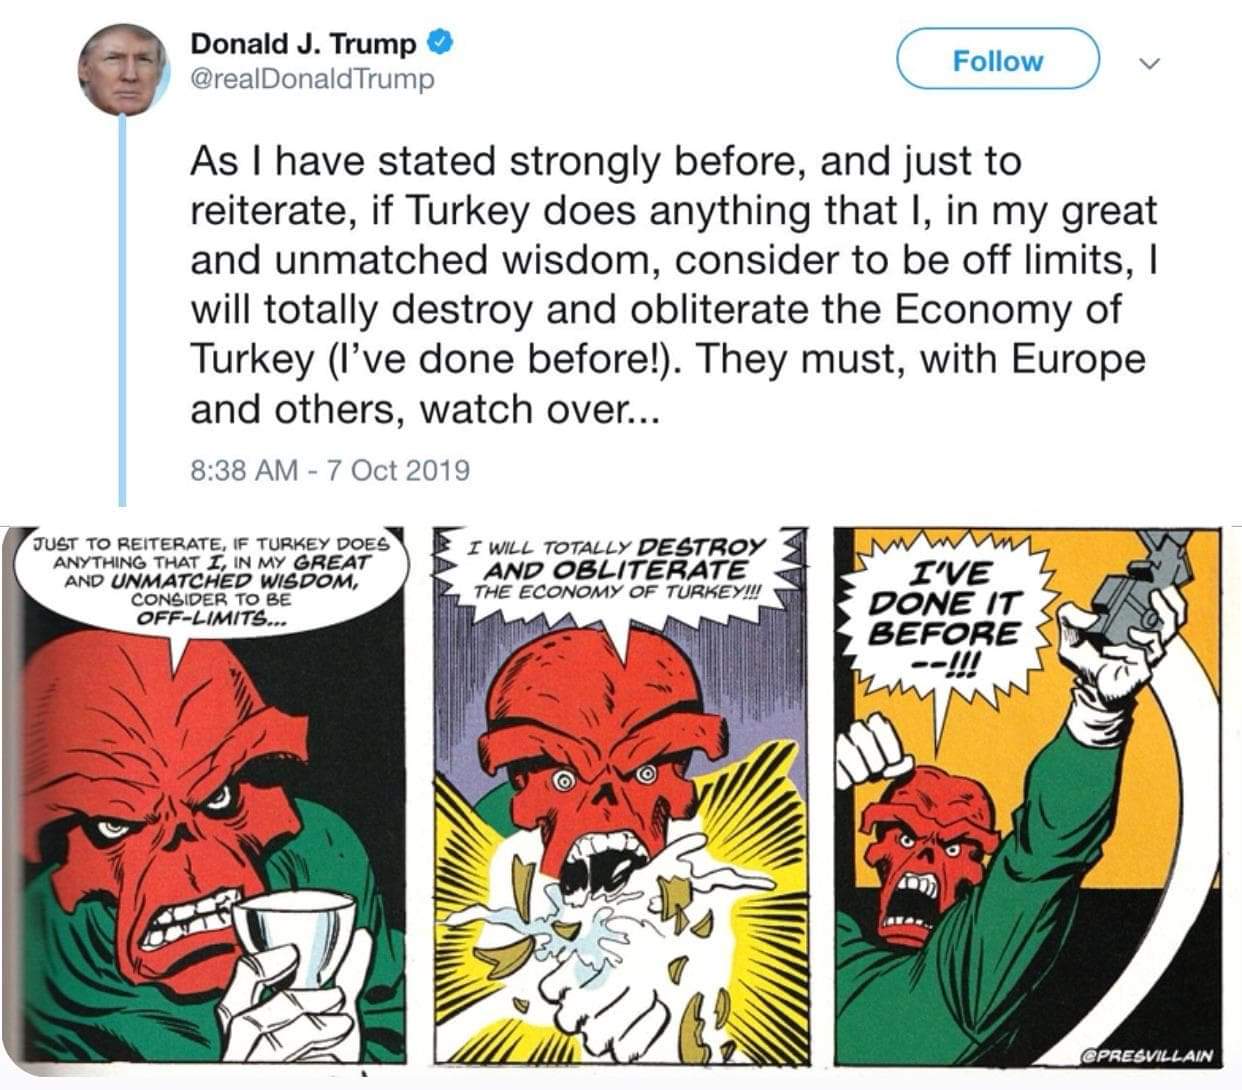 political political-memes political text: Donald J. Trump Follow @realDonaldTrump As I have stated strongly before, and just to reiterate, if Turkey does anything that l, in my great and unmatched wisdom, consider to be off limits, I will totally destroy and obliterate the Economy of Turkey (I've done before!). They must, with Europe and others, watch over... 8:38 AM - 7 Oct 2019 TO REITERATE, F TURKEY DOES ANYTHING THAT r, IN MY ØREAT ANO UNMATCHED W14POM, CONSIDER TO BE 0FF-Ll,qtrgm r DESTROY AND OBLITERATE THE ECONOMY OF TURKEY!!! r'VE PONE IT BEFORE e PREWU-LAIN 